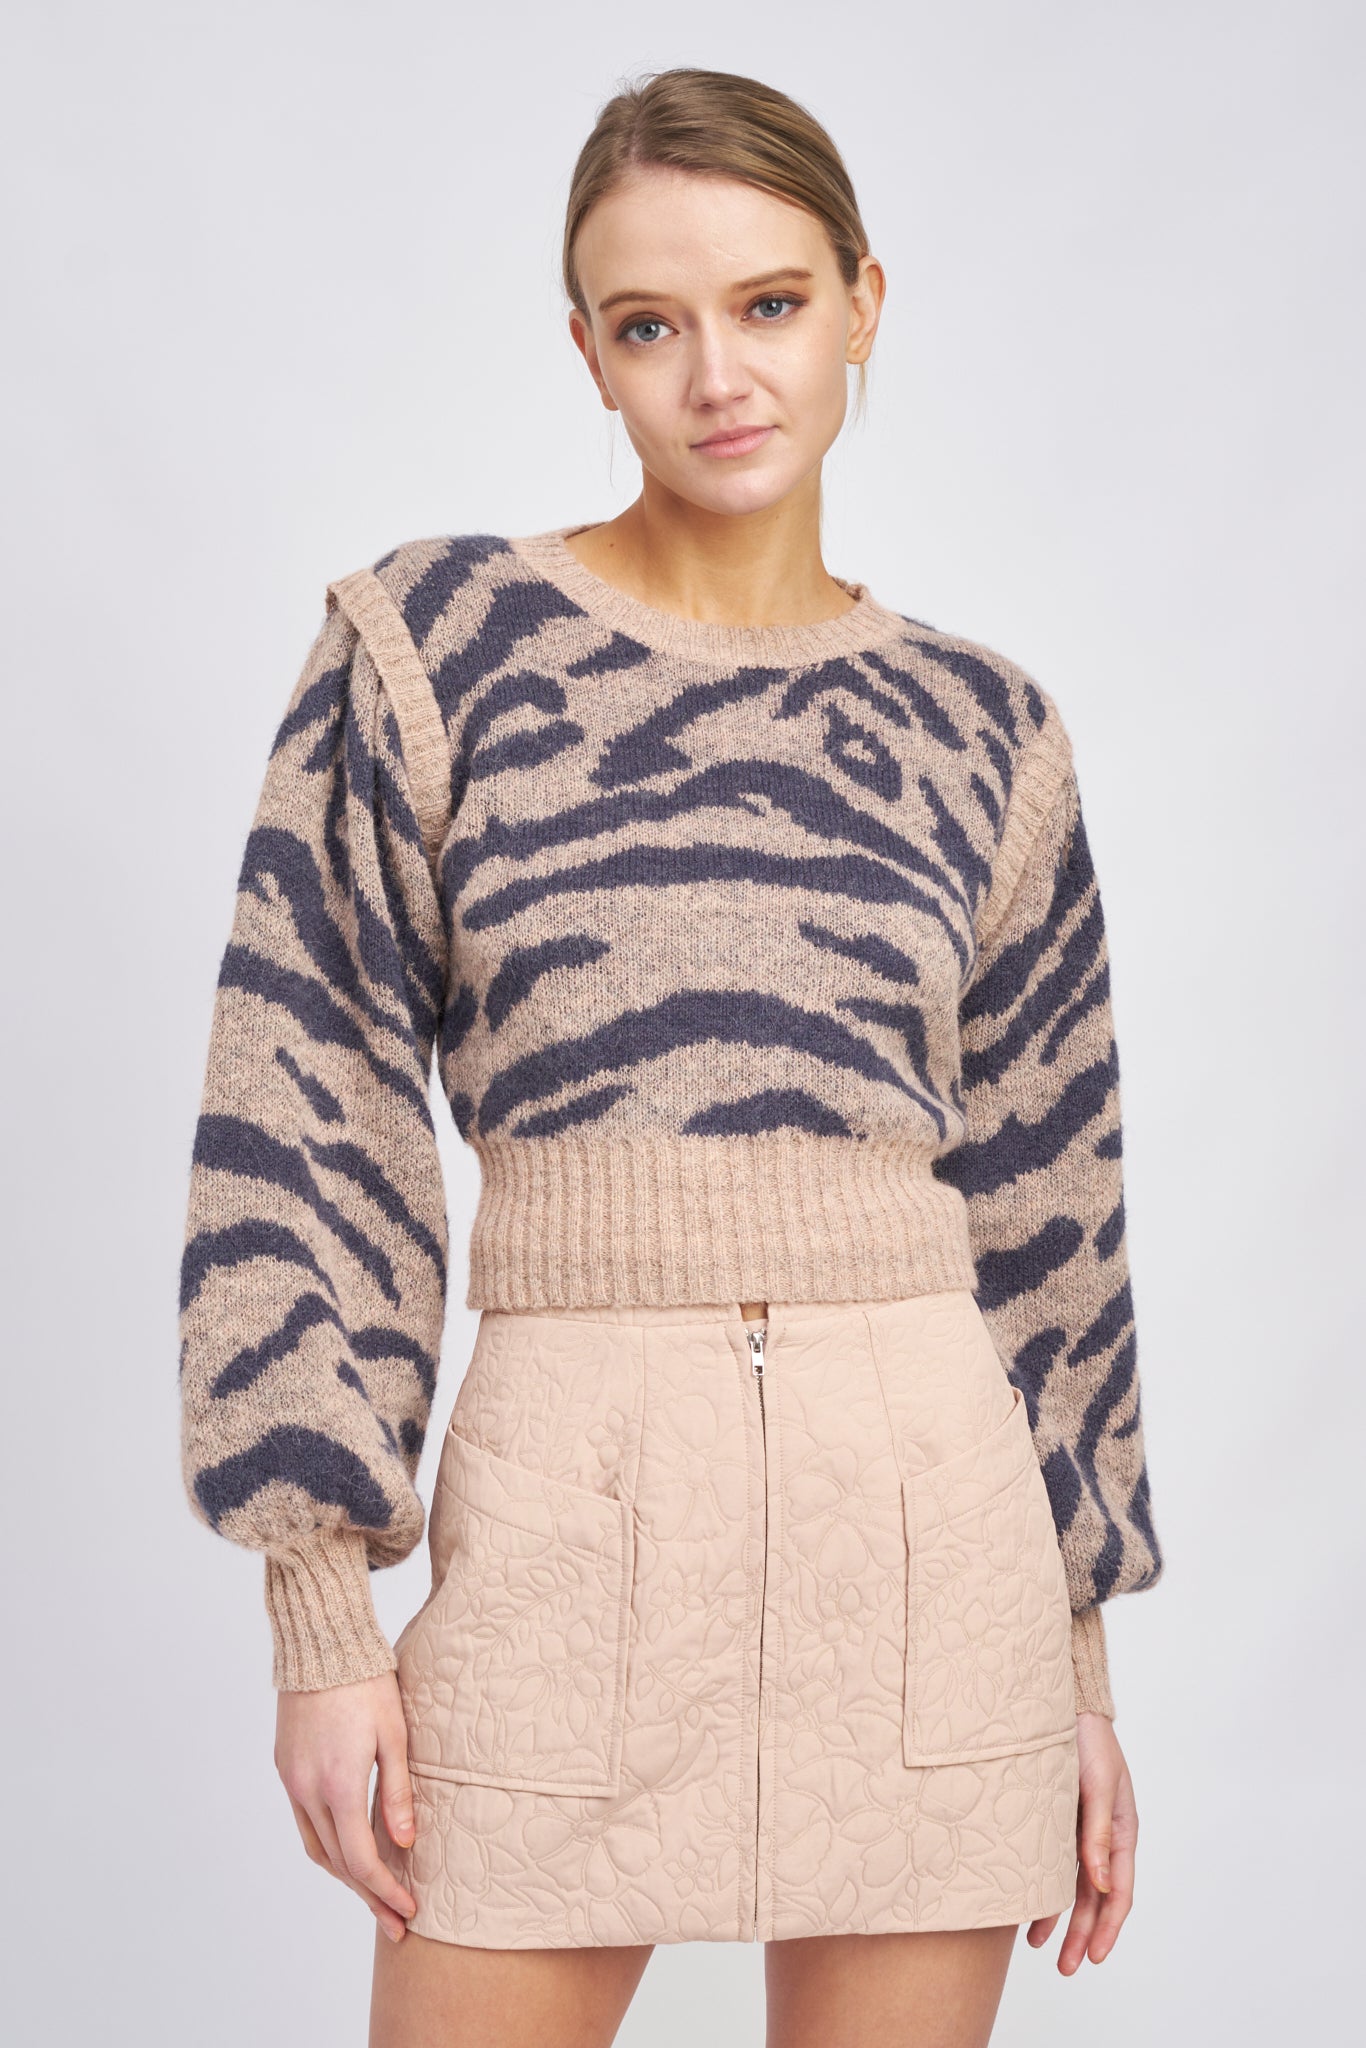 Mares Knit Top